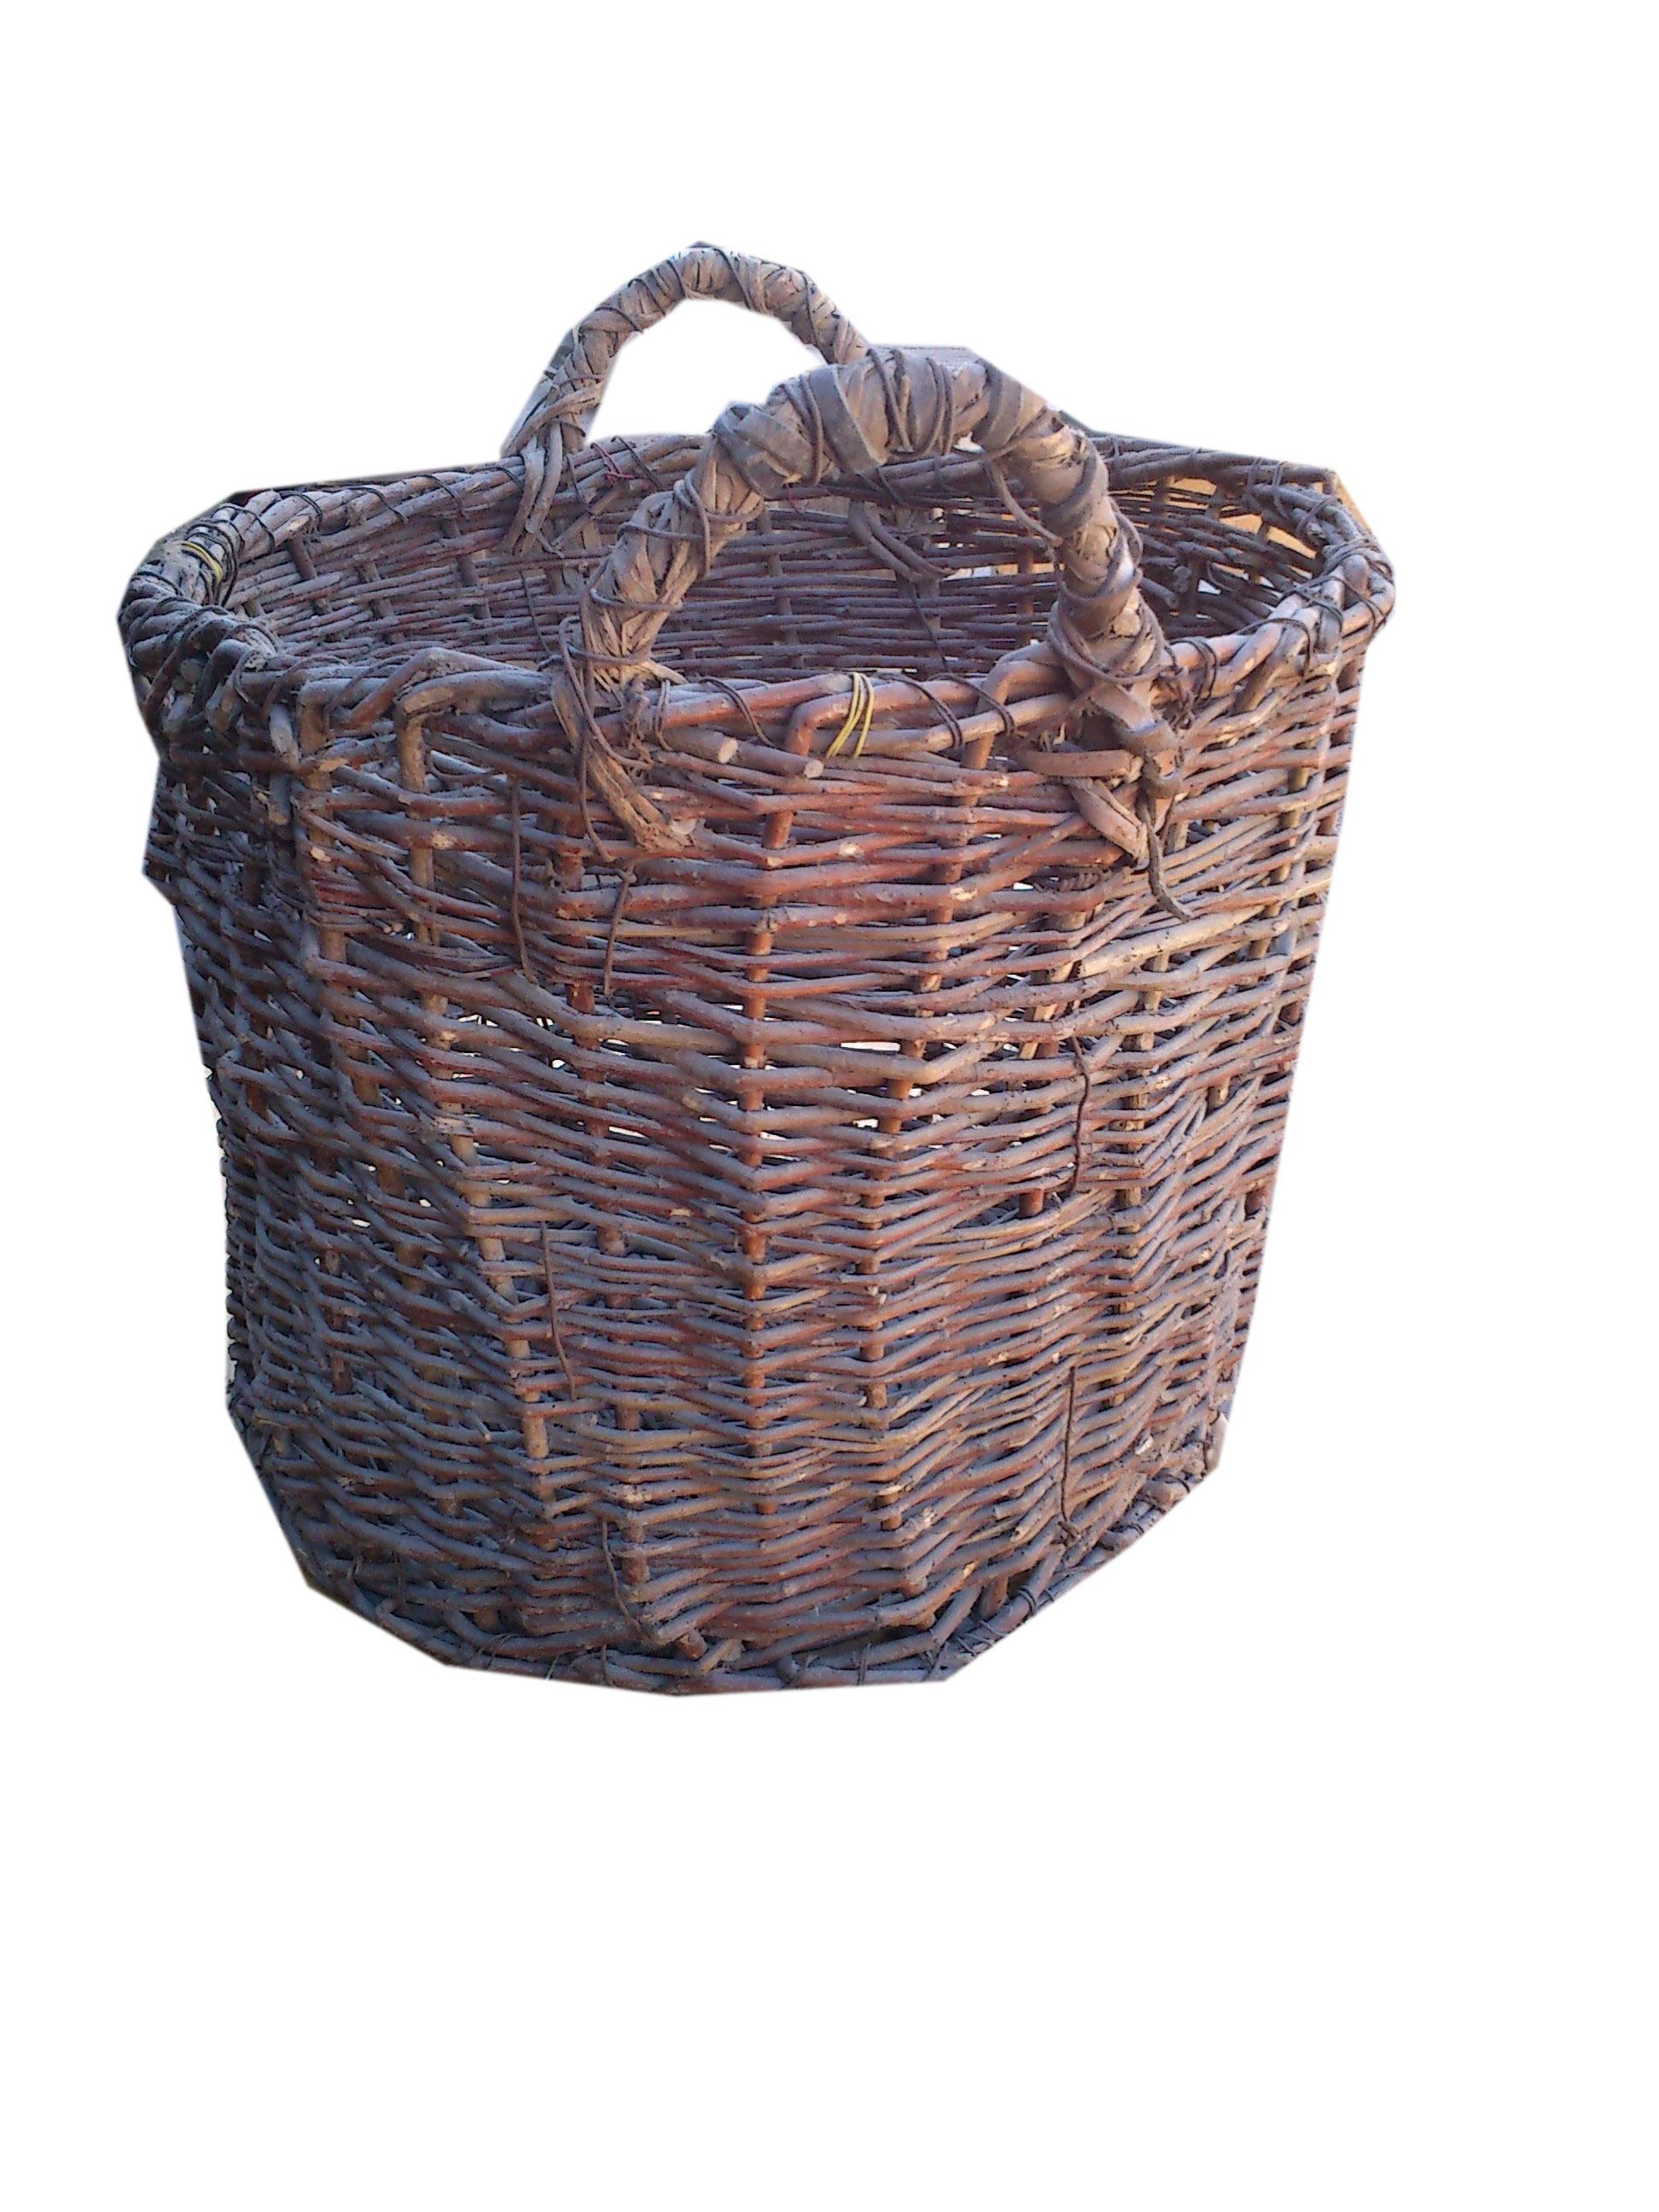 Antique basket with handles from a small town in Hungary.
Large Hungarian vineyard harvest wicker basket.
Handmade and handwoven of a thick wicker in superb condition and a lovely warm patina.
Great as a decorative item by the door to hold